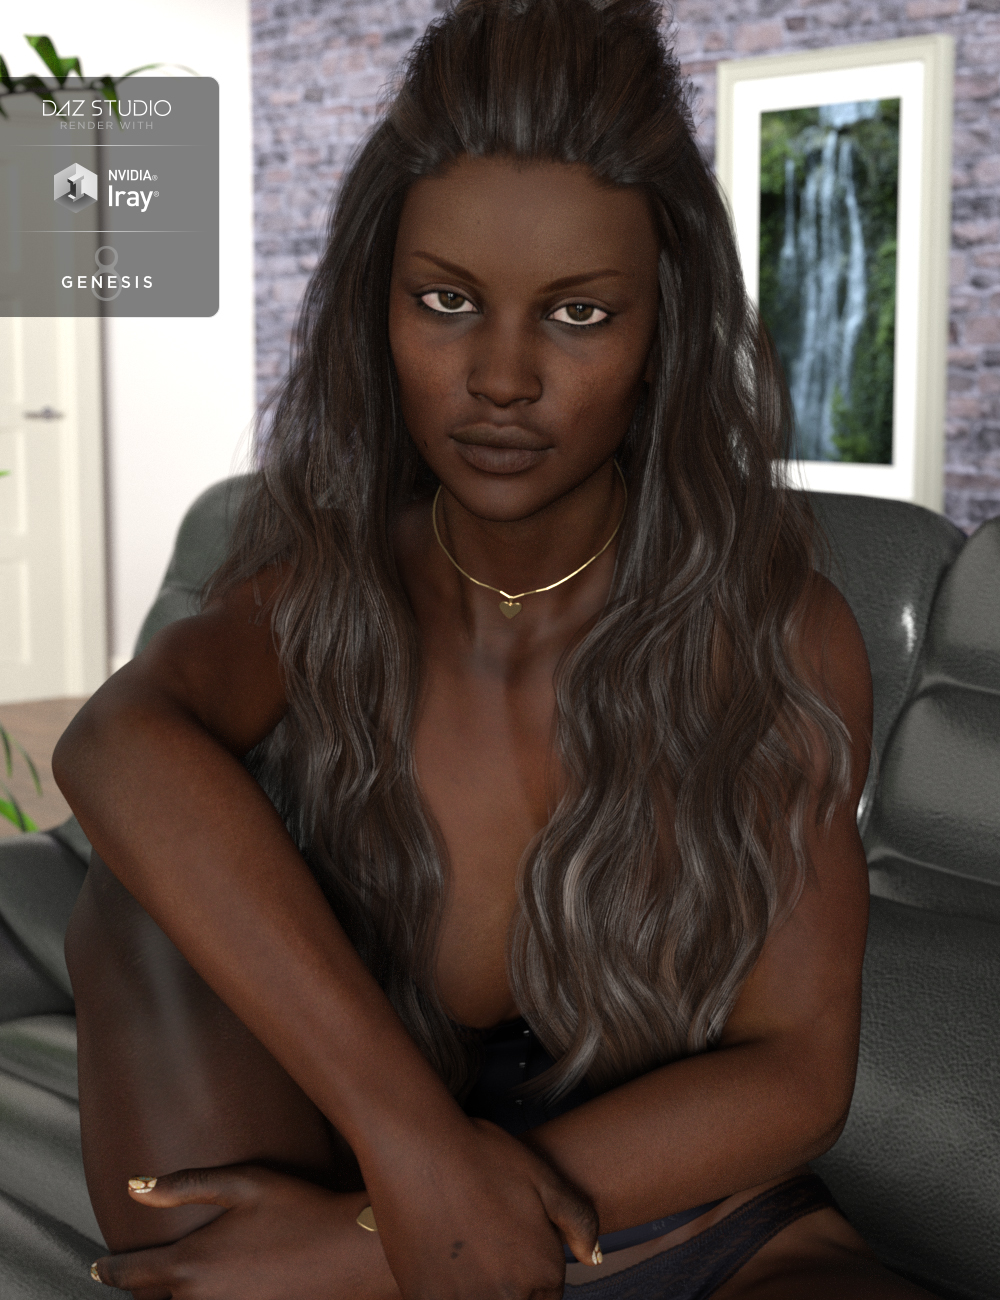 Angelica for Genesis 8 Female by: iSourceTextures, 3D Models by Daz 3D